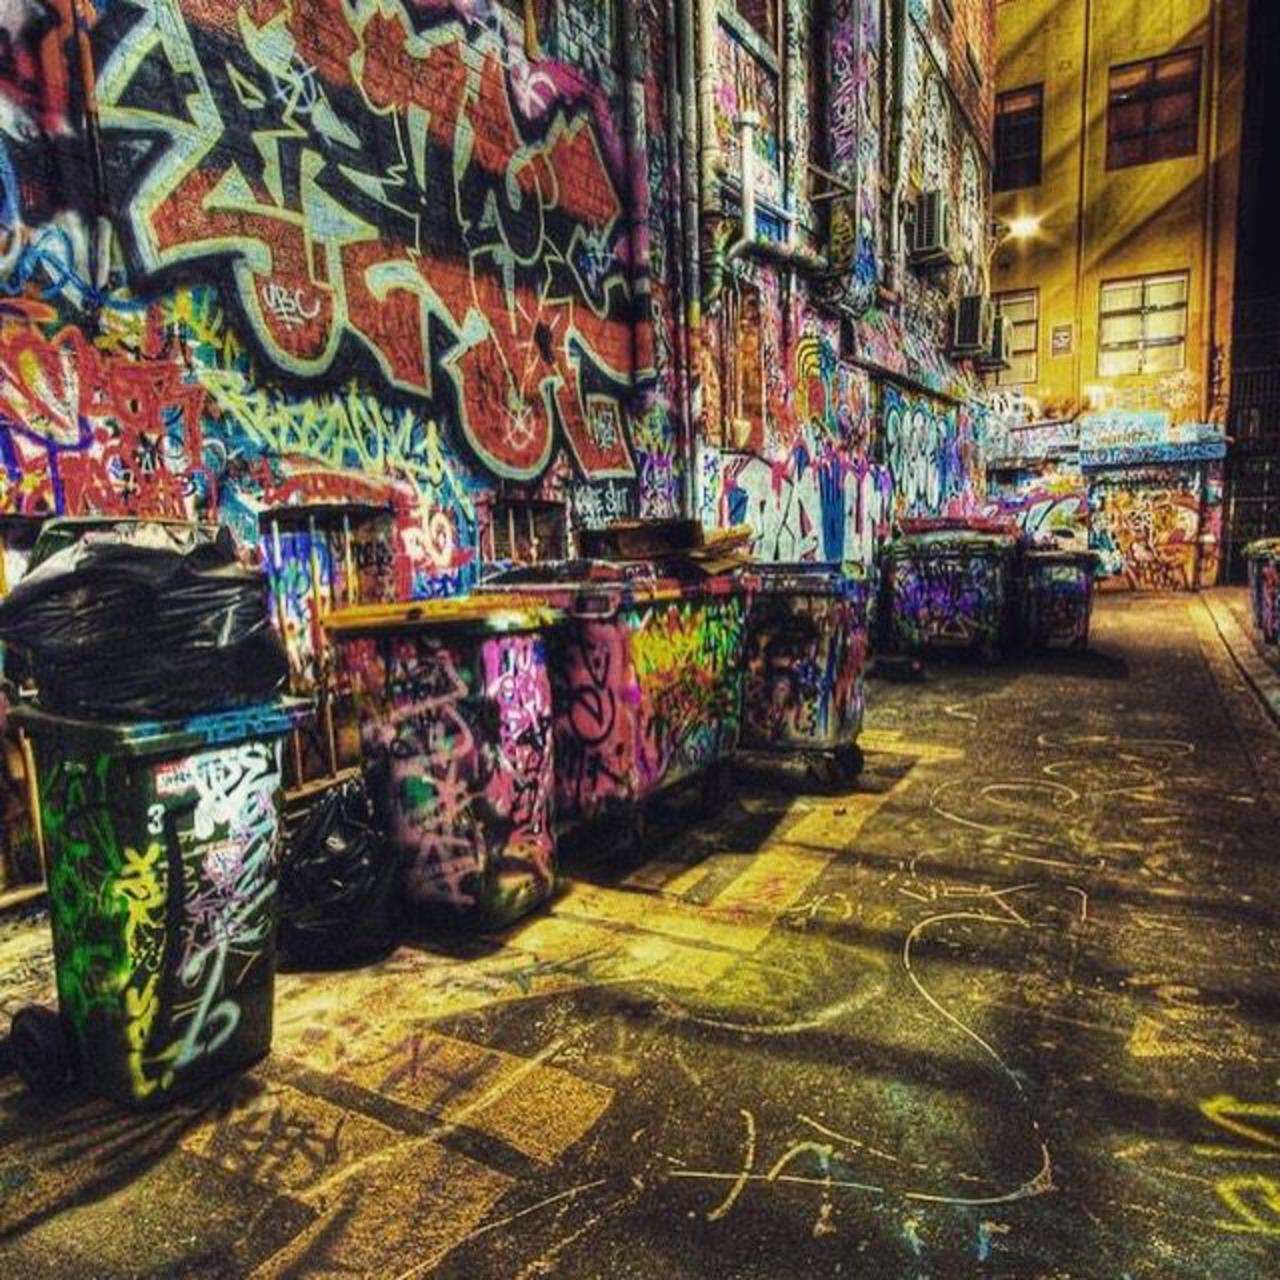 Very cool alley #dope #art #graffiti #tagged http://t.co/Vr4W5zLnVV